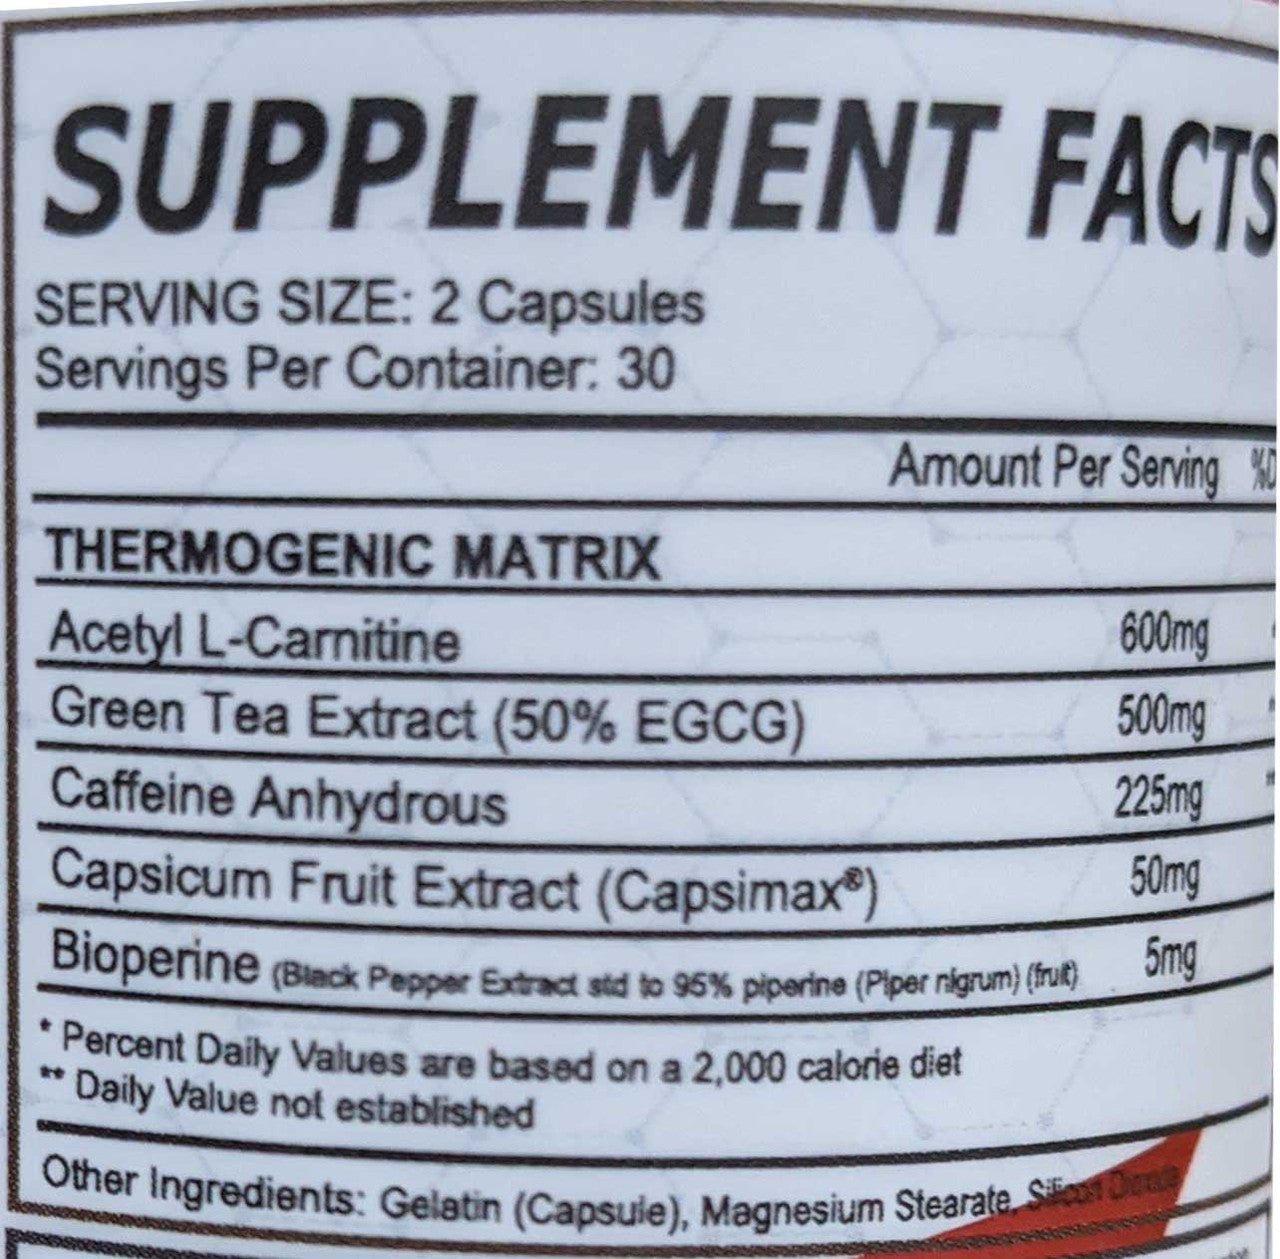 A1 Plus+ Thermo Supplement Facts